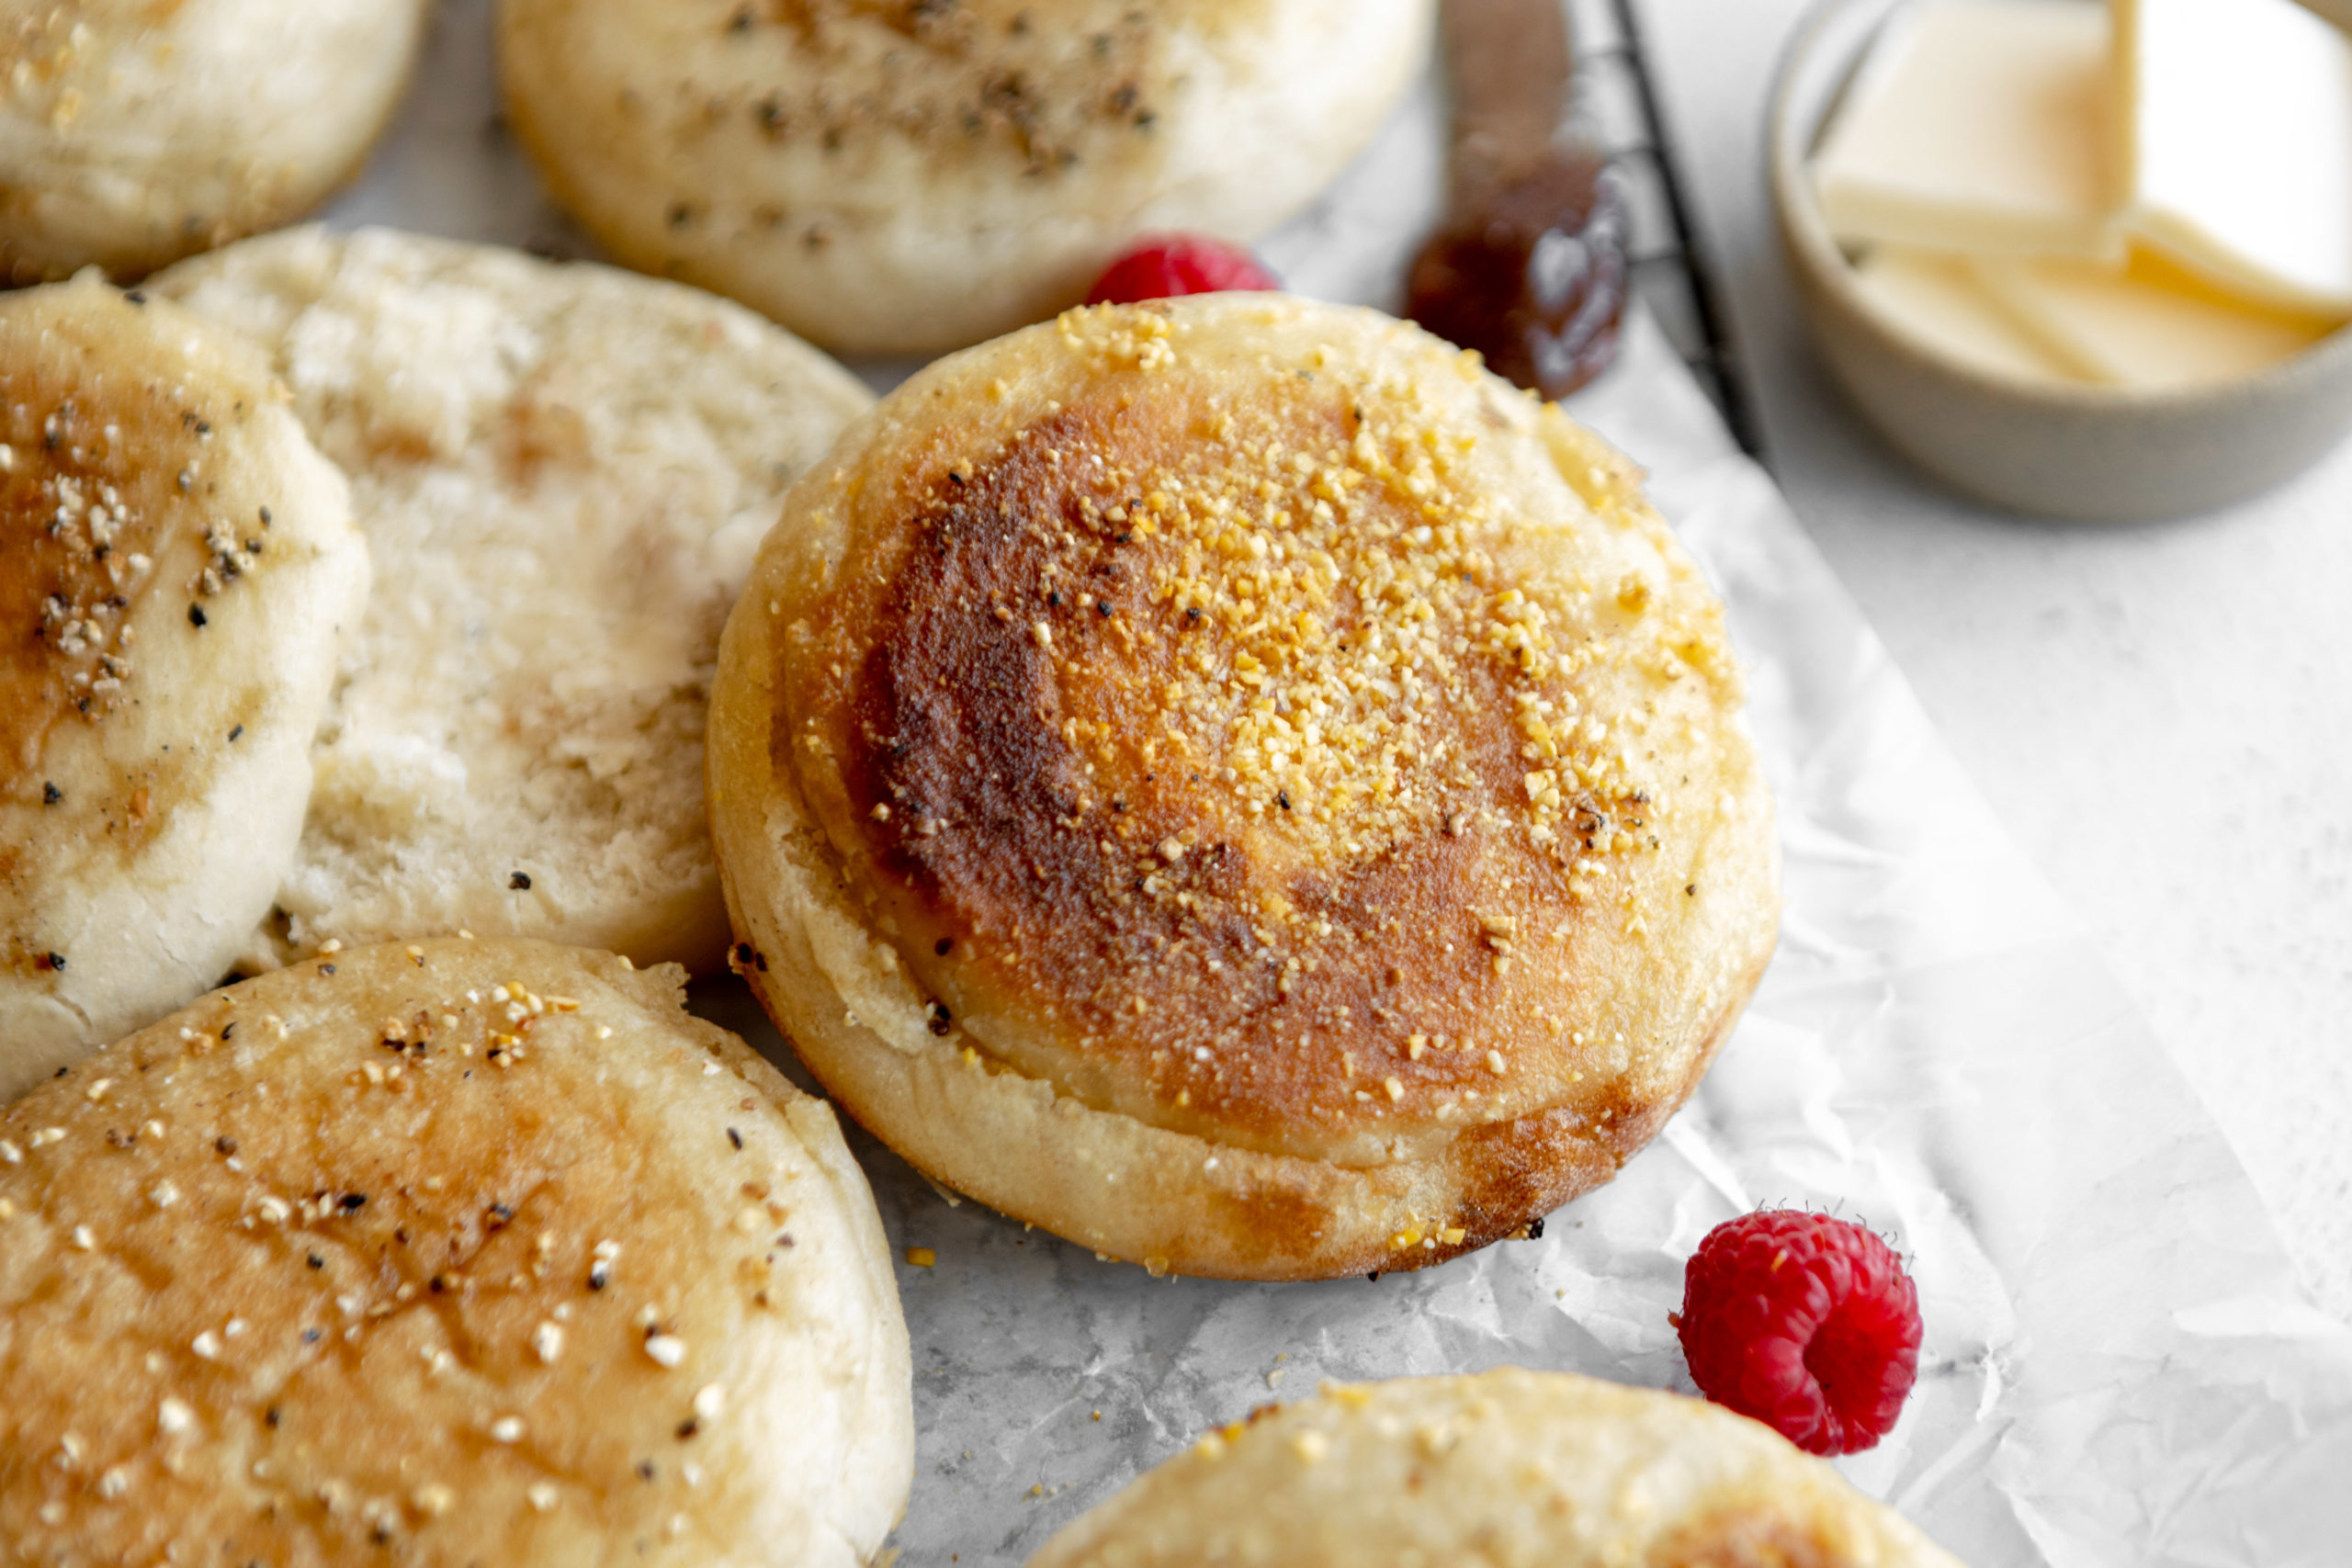 Gluten-free english muffins on parchment paper with raspberries.